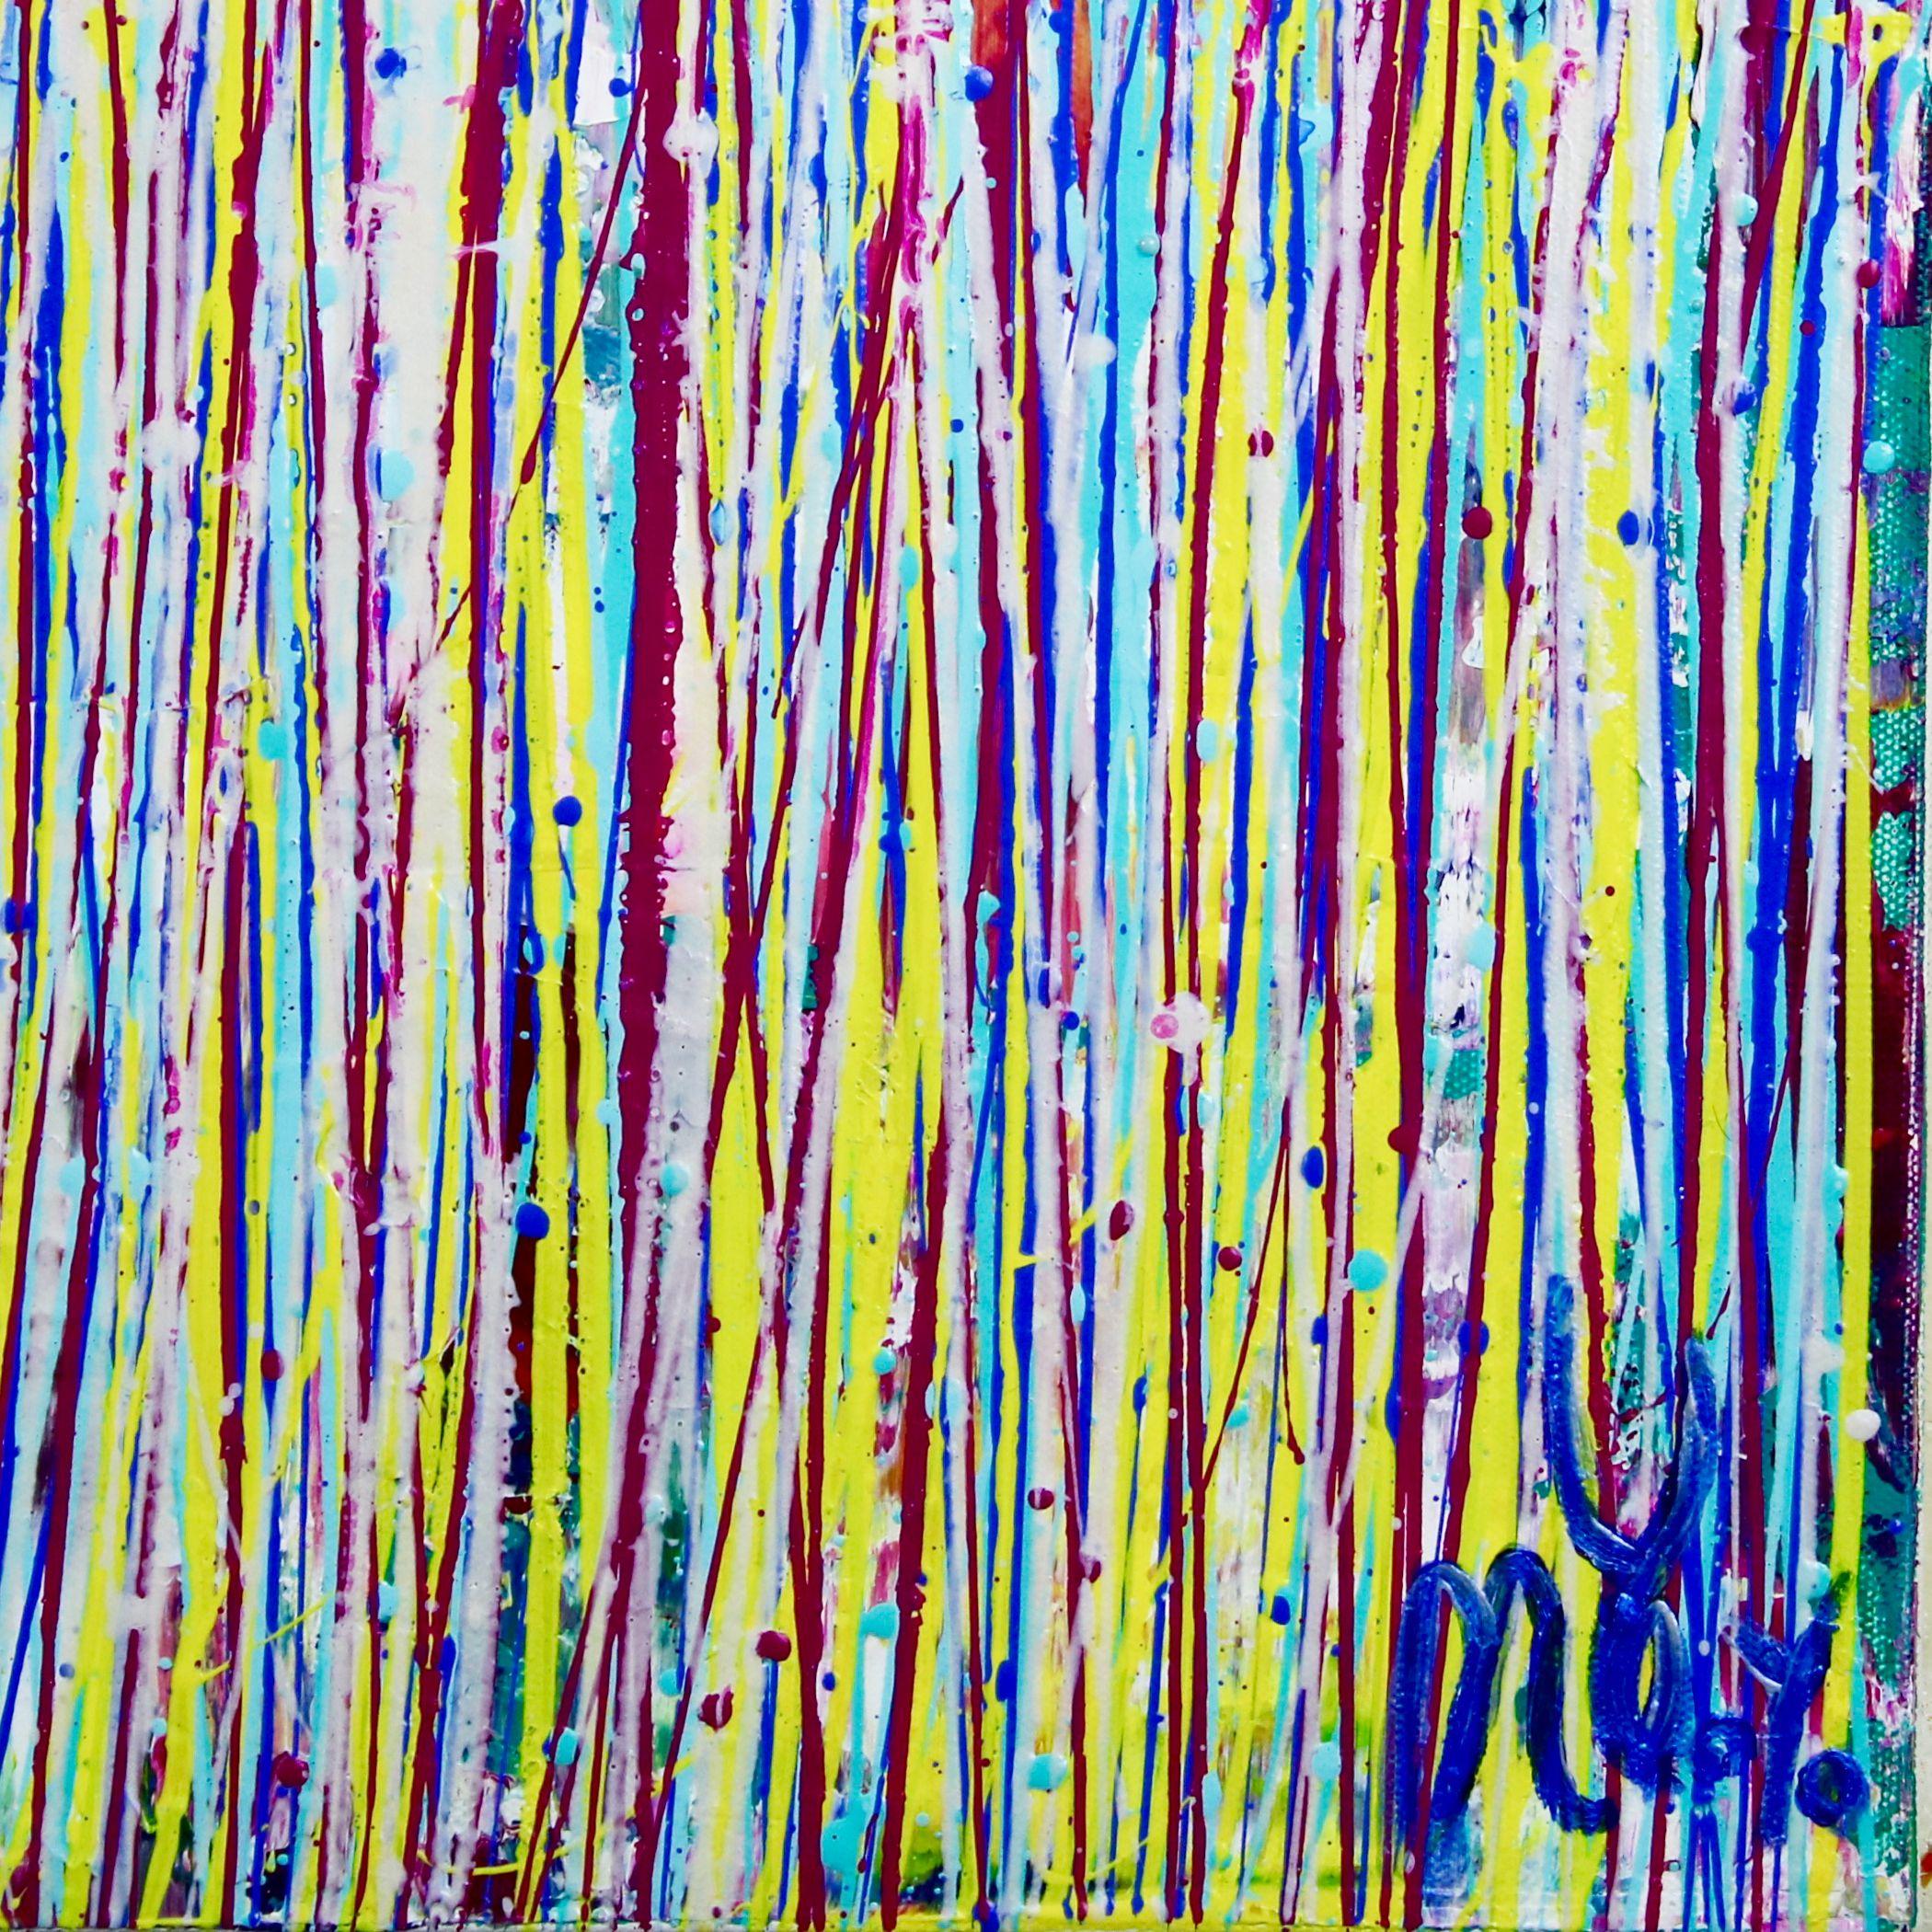 Ready to hang  Acrylic on canvas    Vibrant expressionistic abstract multi color background with burst of colors. Yellow, green, purple, metallic light blue and teal. This artwork arrives mounted in a wooden frame ready to hang!!! signed in front.  